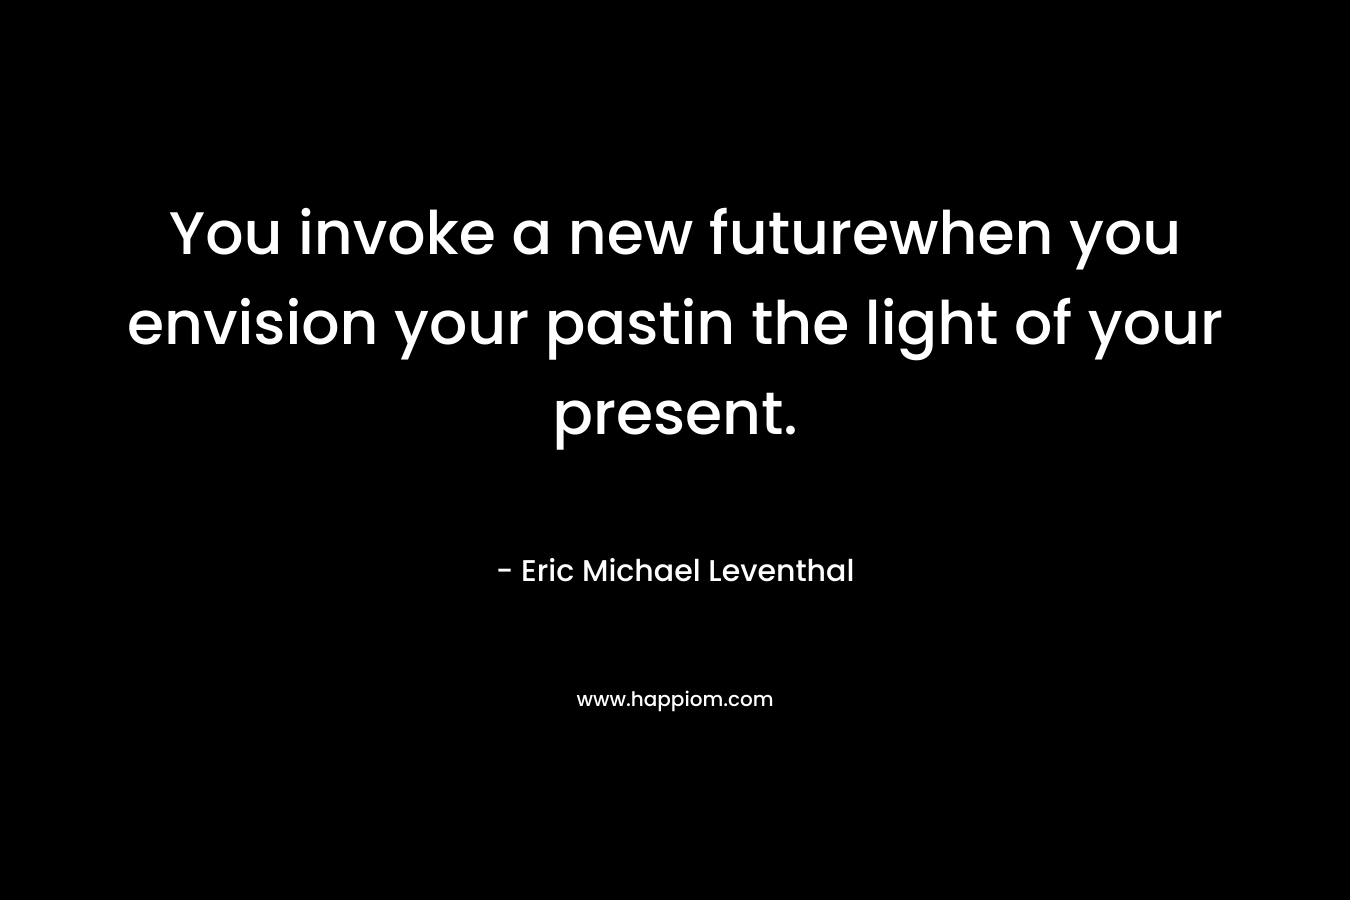 You invoke a new futurewhen you envision your pastin the light of your present.